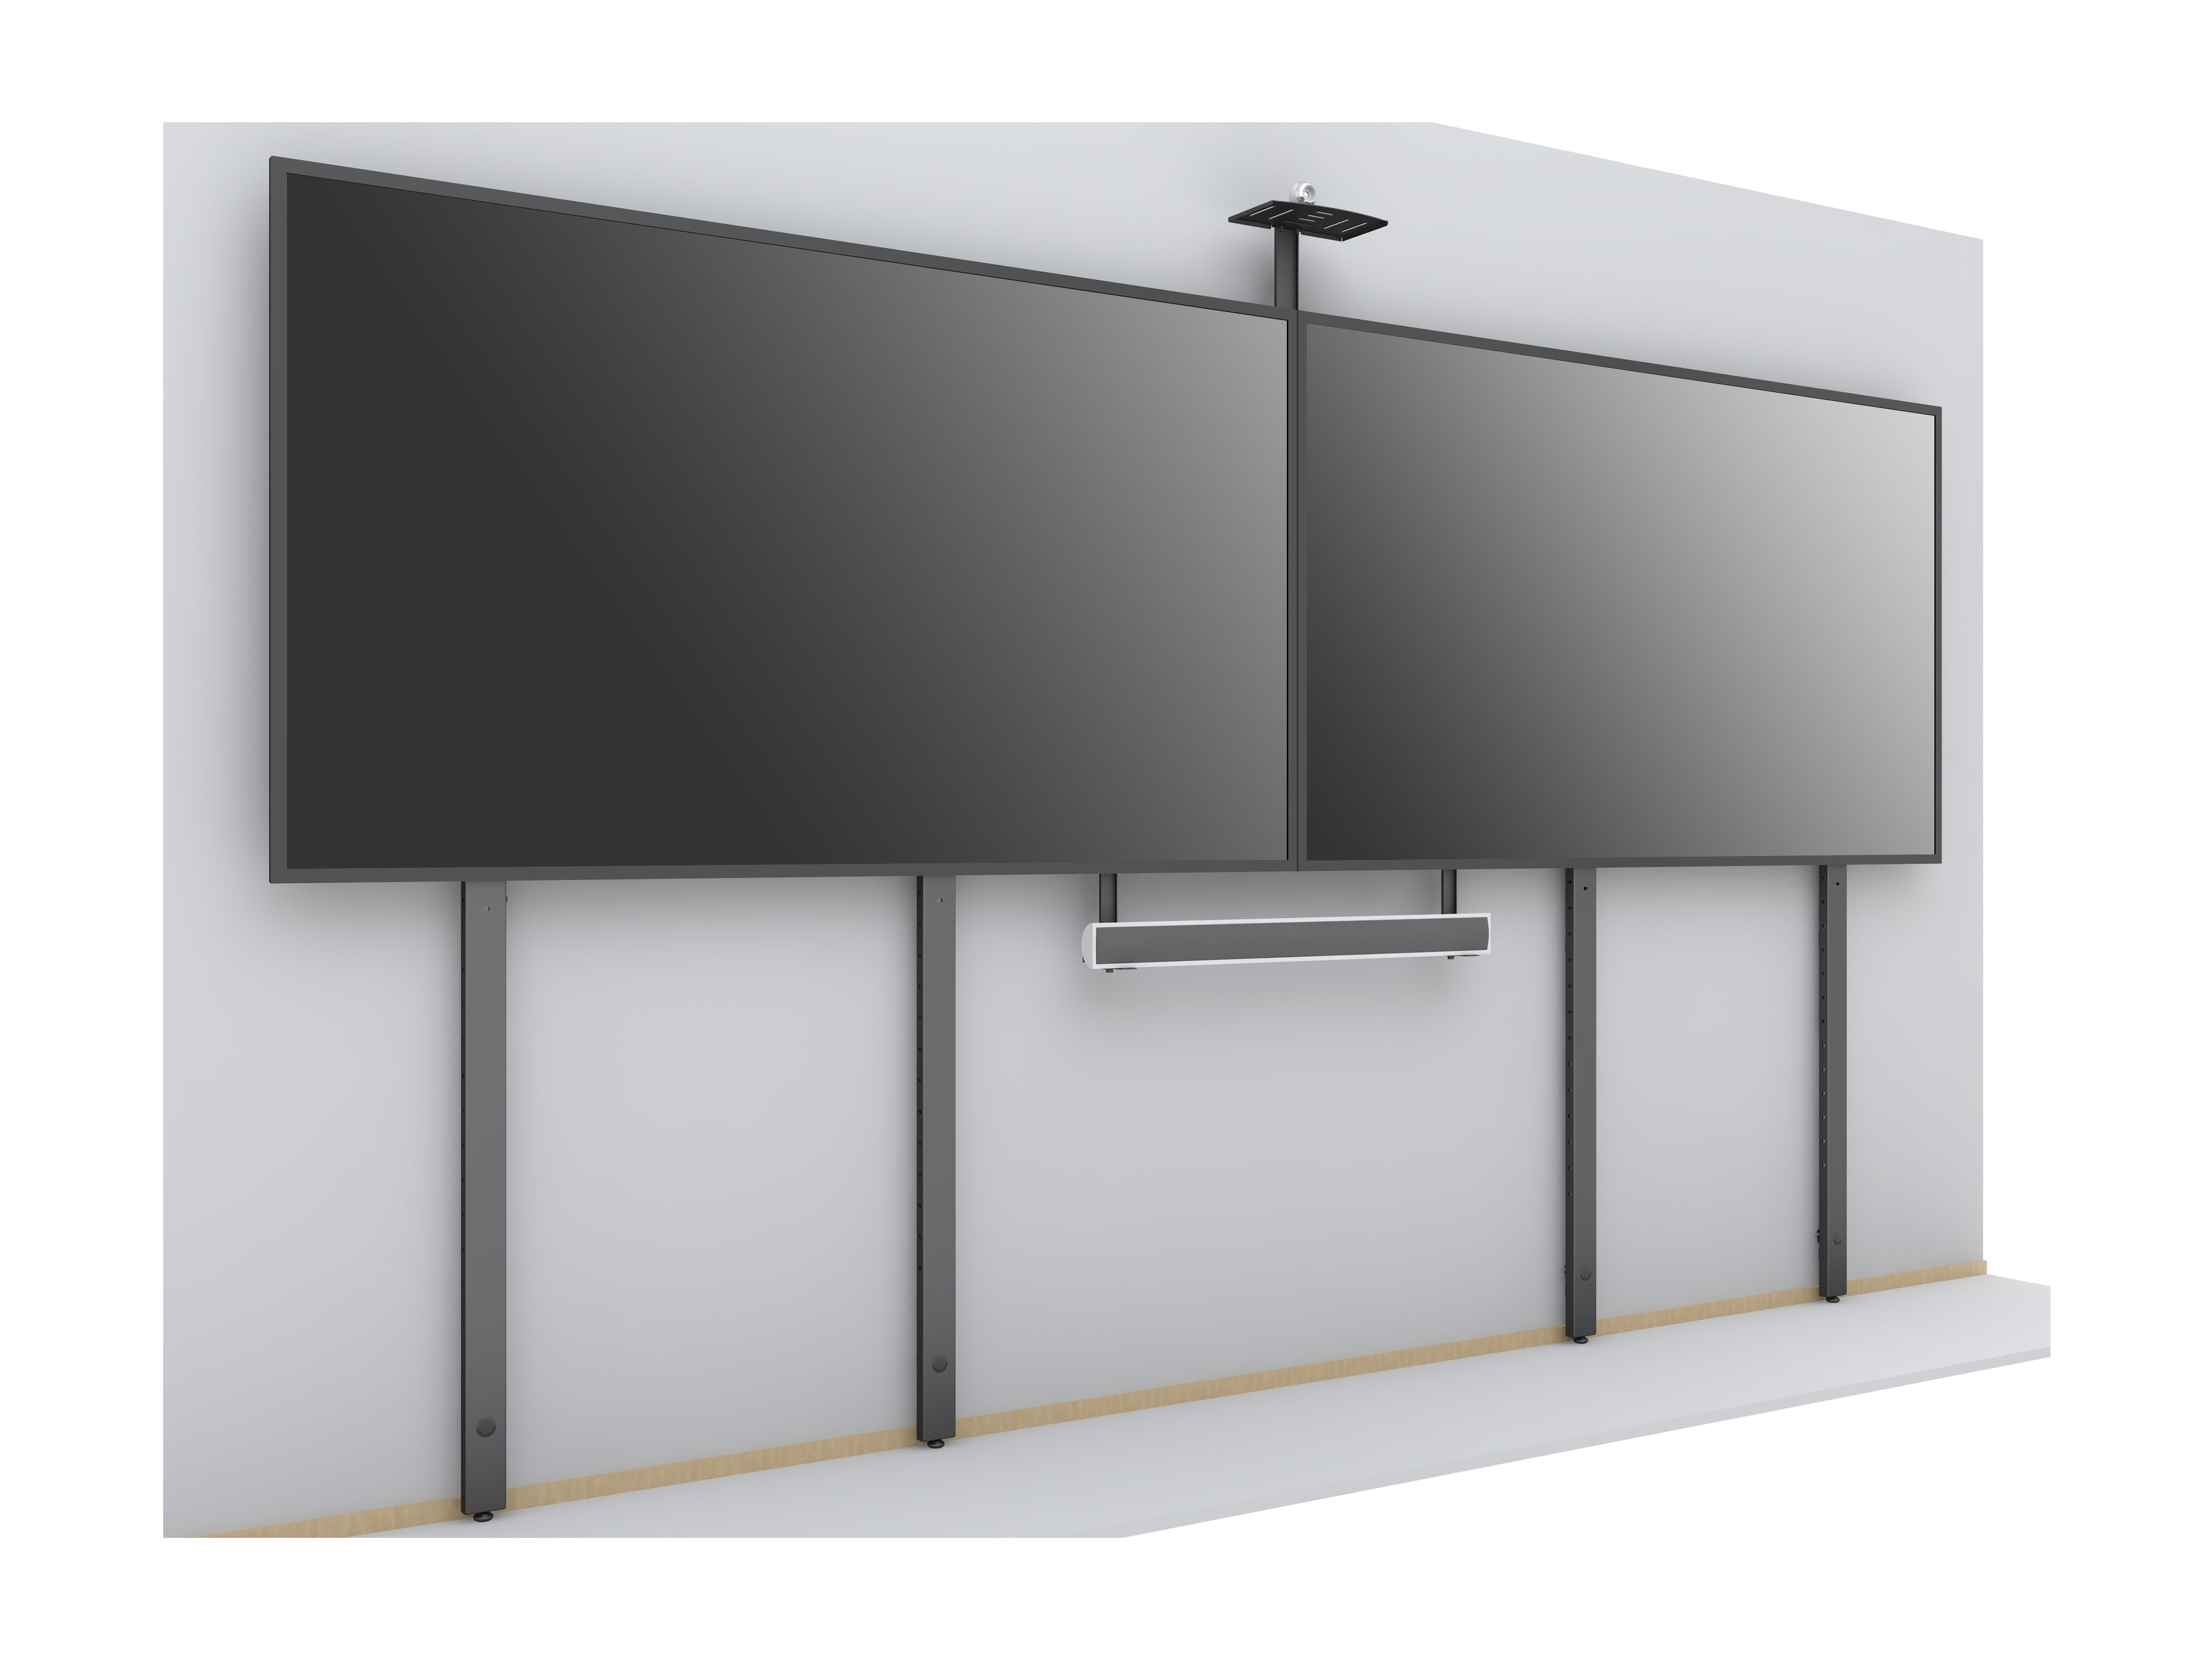 Dual-Screen Video Conference Mount System with Camera and Codec/Soundbar Shelves Up to 75" Screens